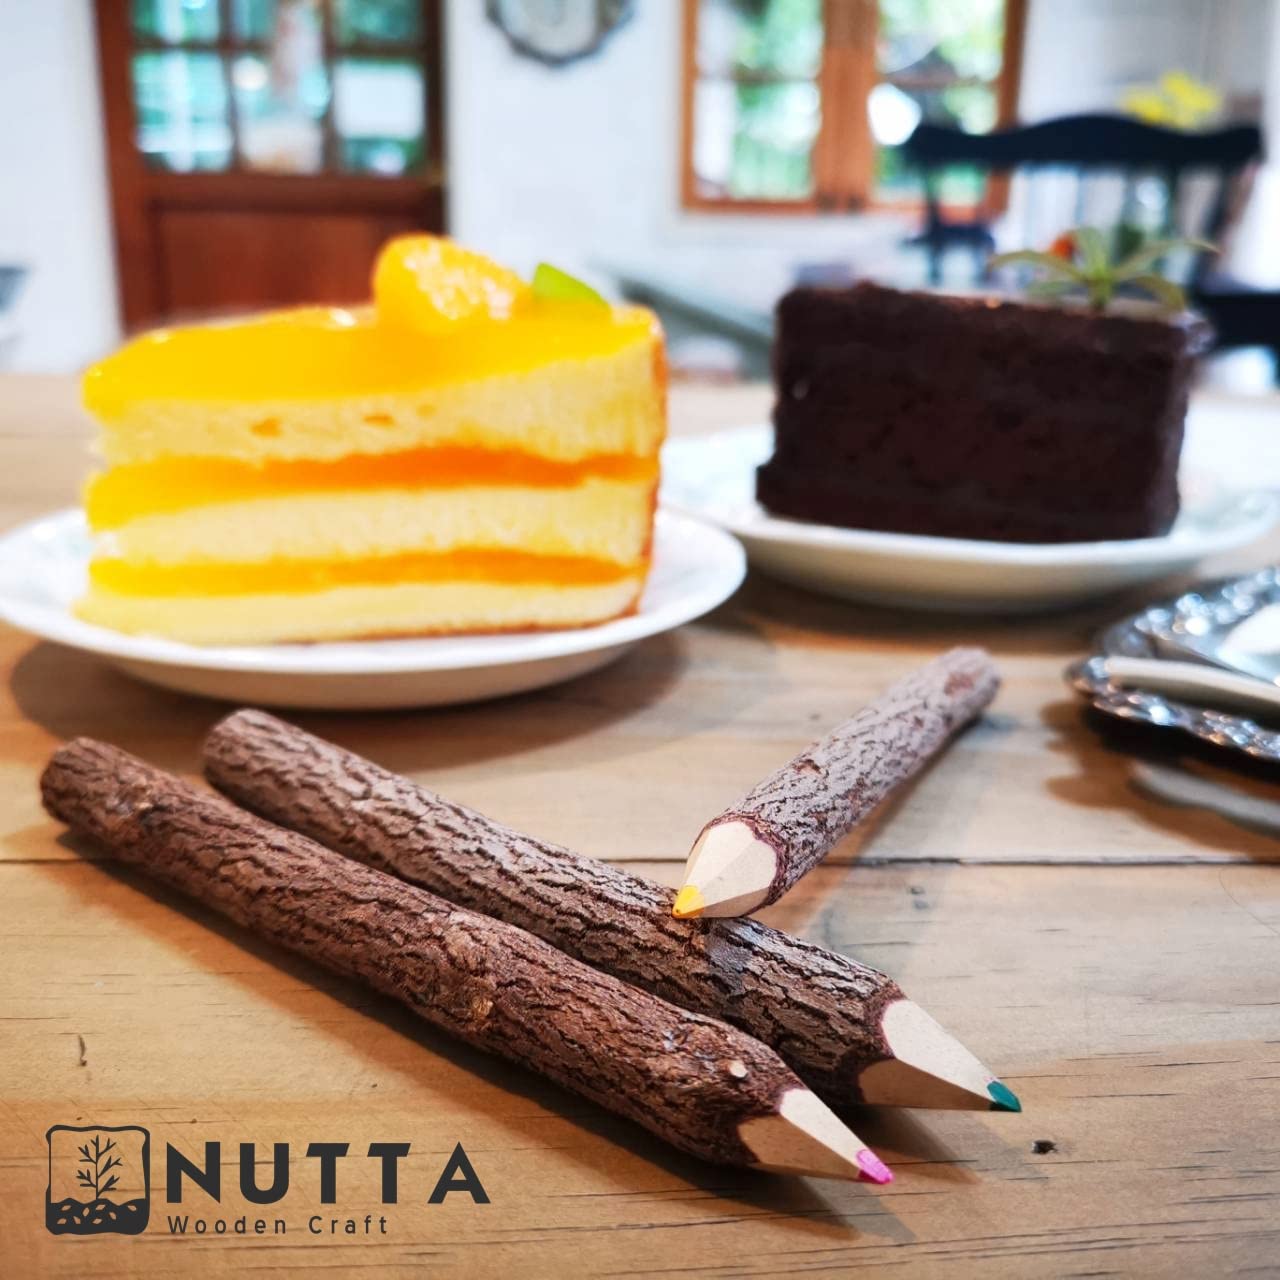 NUTTA - ASSORT COLORED, Branch & Twig Pencil, 12-PCs, Natural Wooden Pencils Wood Tree Rustic Twig Pencils Fun Pencil for Children and Family Wooden